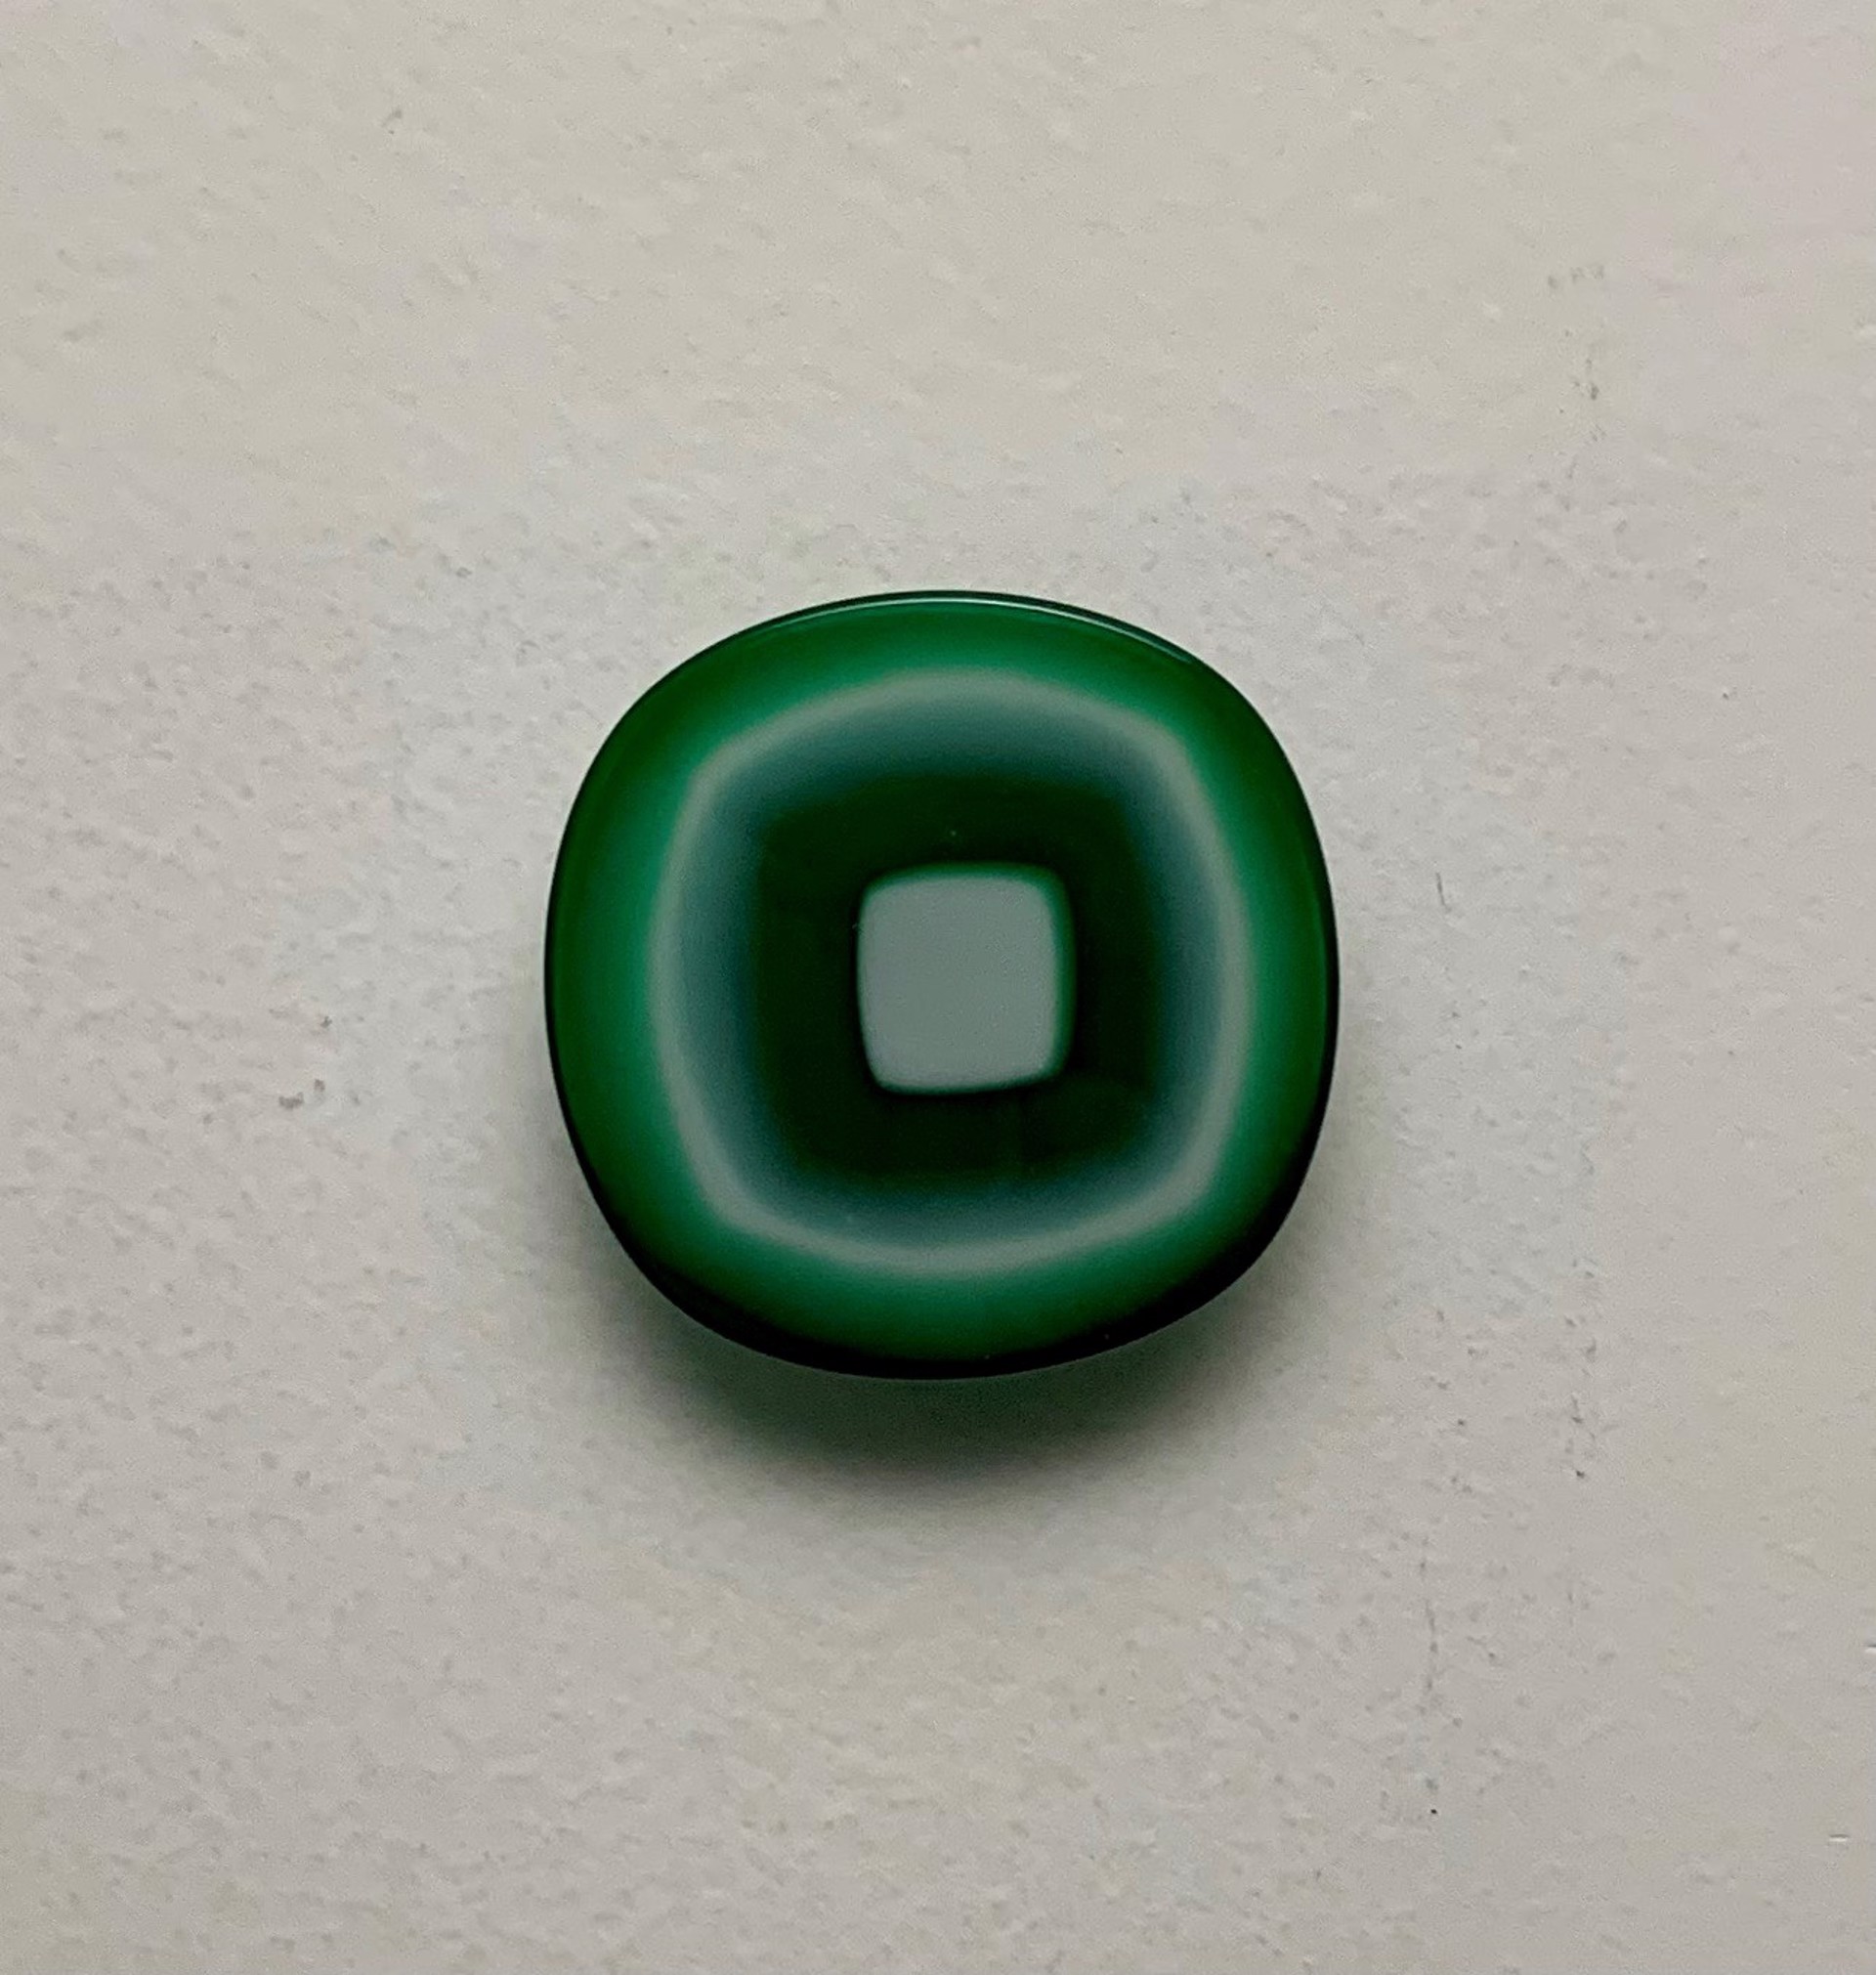 Compressed Wall Art / Knobs / Pulls / Hooks - Transparent Green by Chris Cox